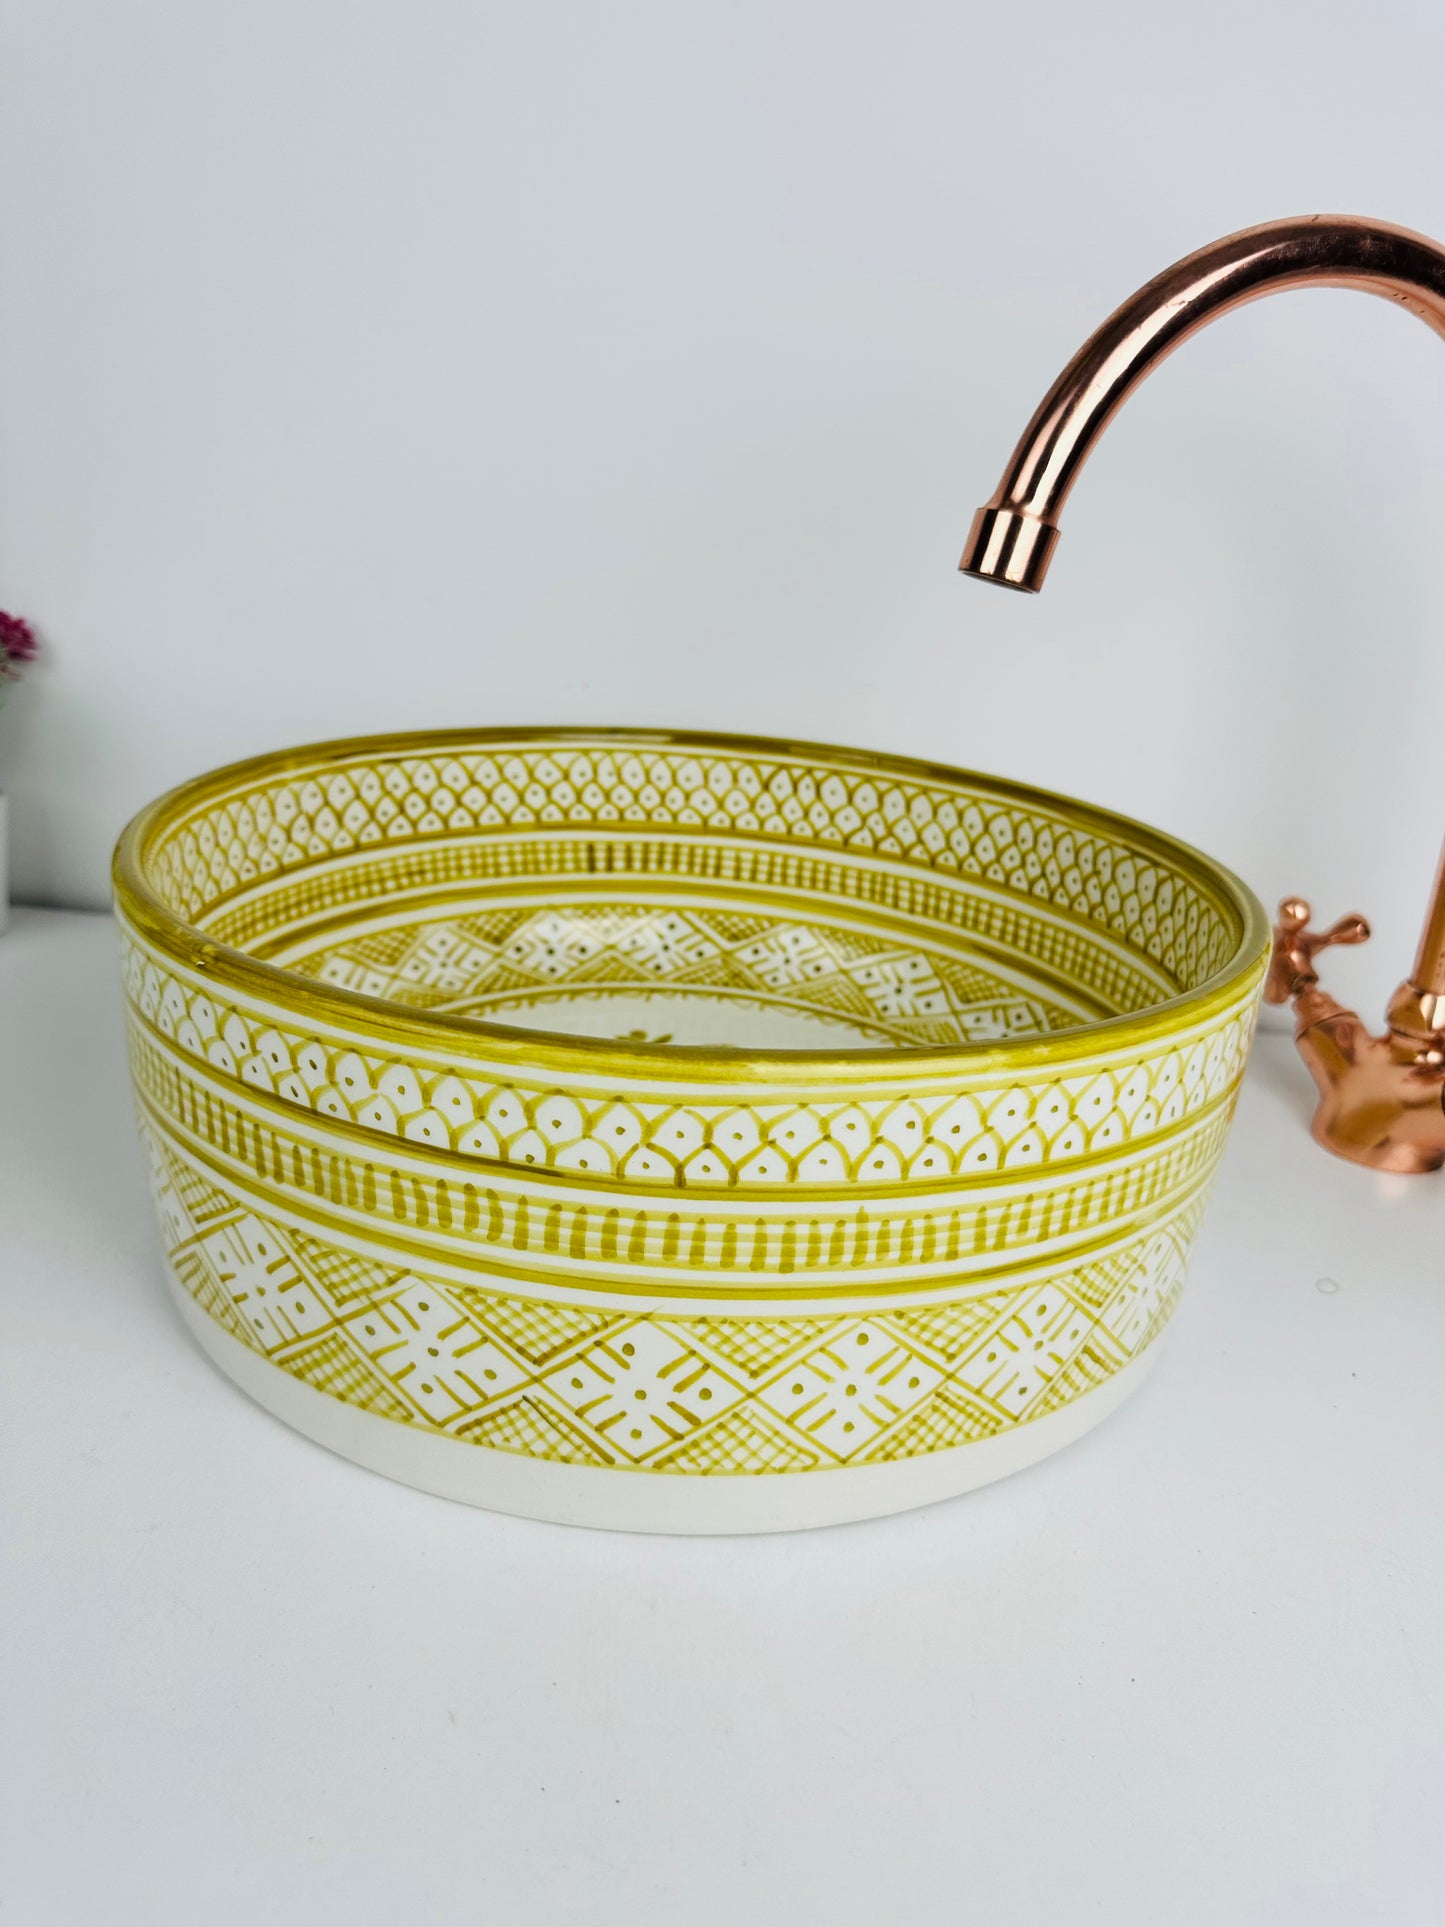 Olive Enchantment: Handcrafted Ceramic Sink in Olive Green Hue